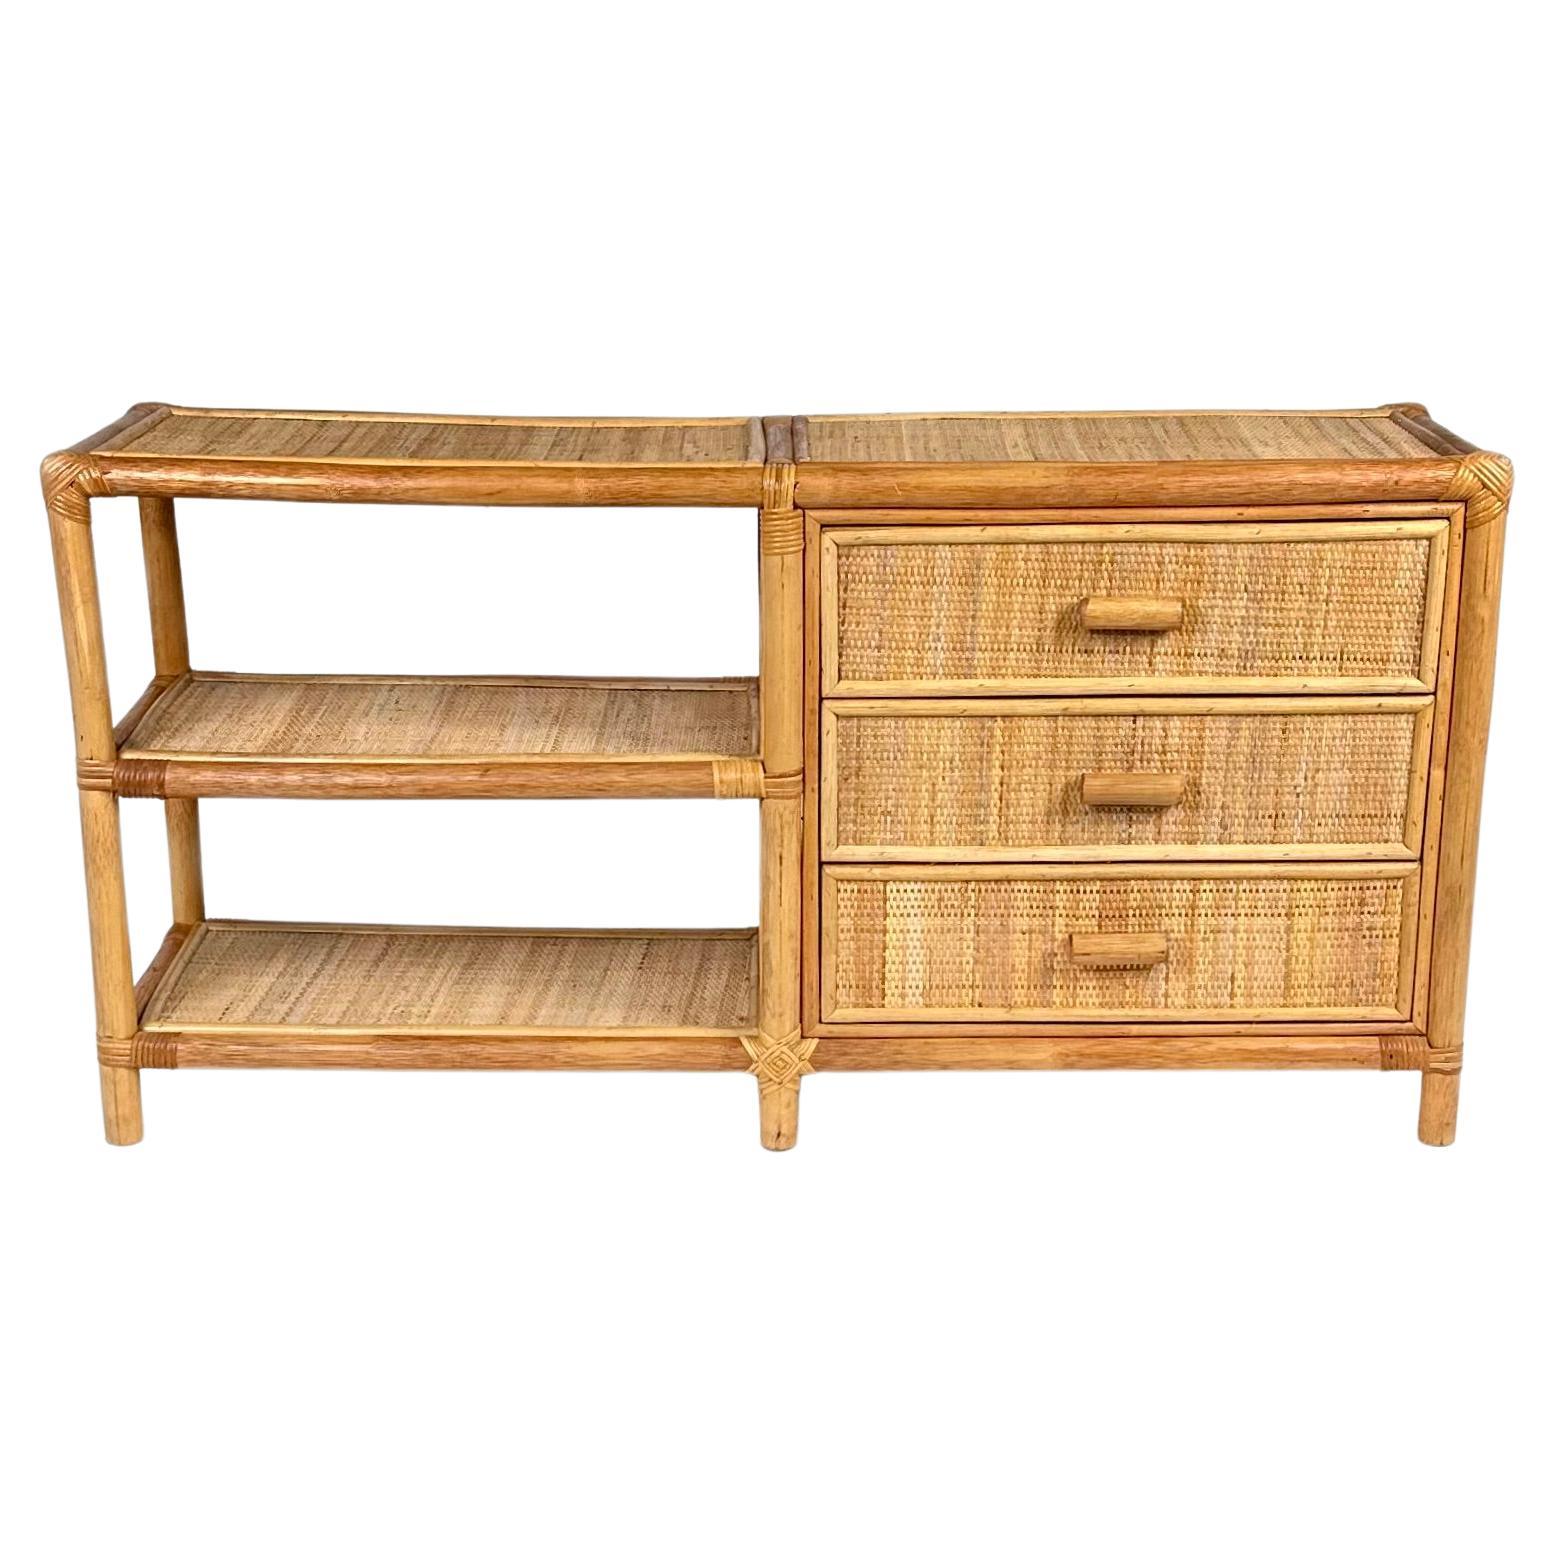 Midcentury Bamboo and Rattan Cabinet Sideboard whit Drawers, Italy 1970s For Sale